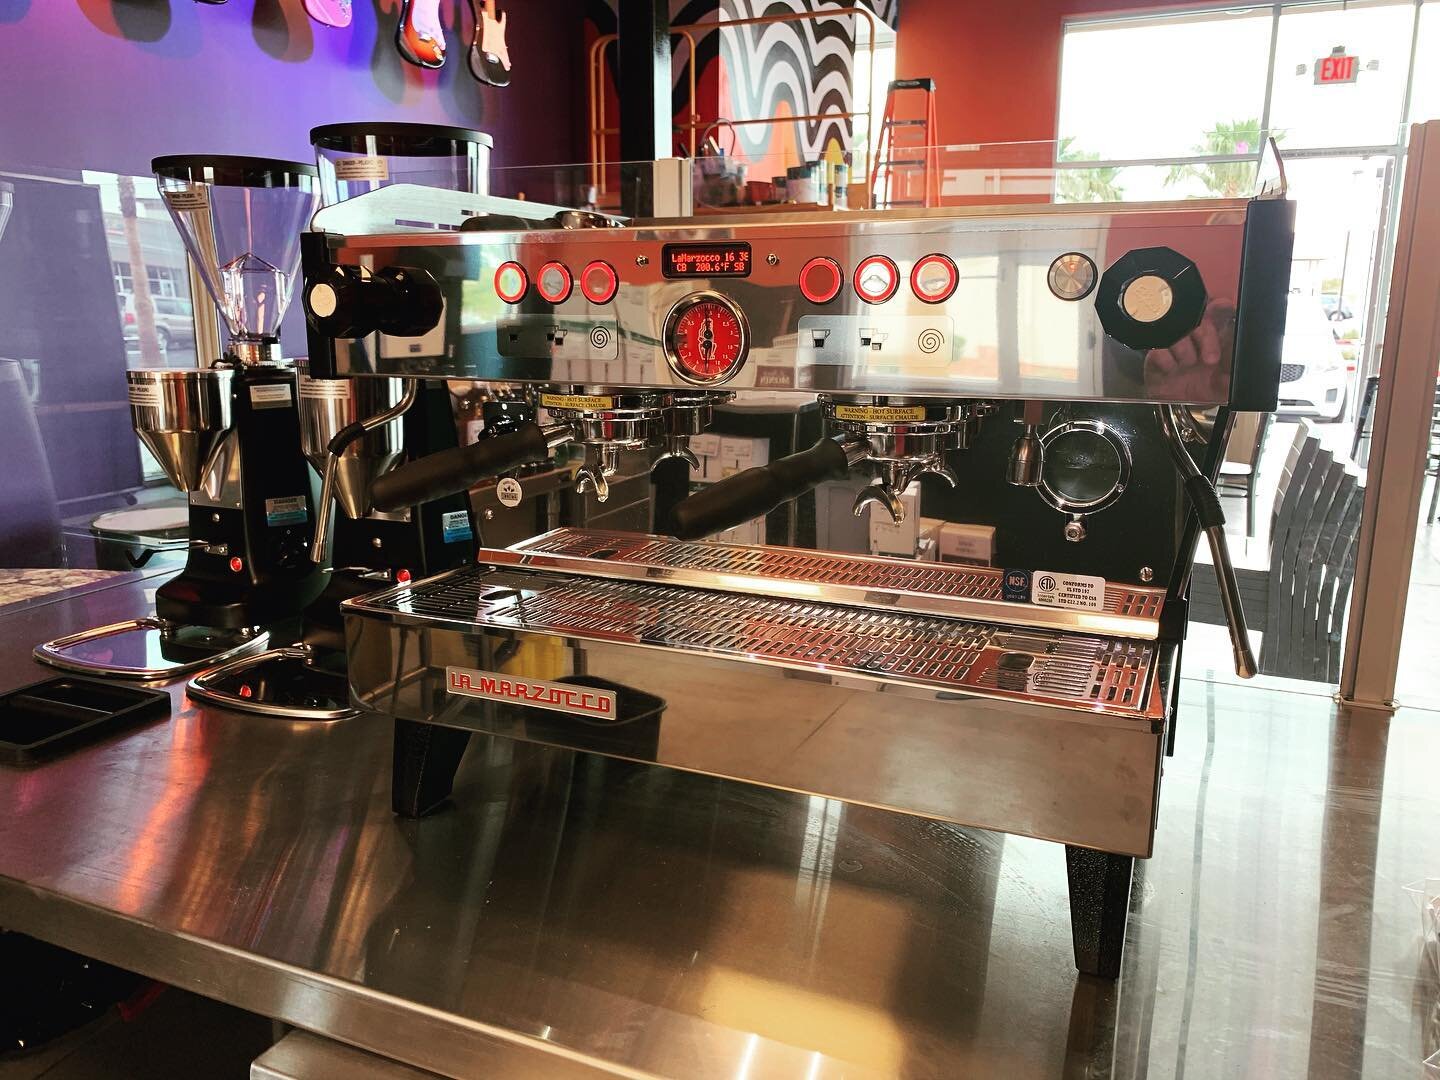 Classic Rock Coffee on Silverado Ranch is coming along nicely! Call us if you are looking for some new equipment for your shop. #lasvegascoffee #lasvegascoffeeculture #lamarzocco #puqpress #mazzergrinder